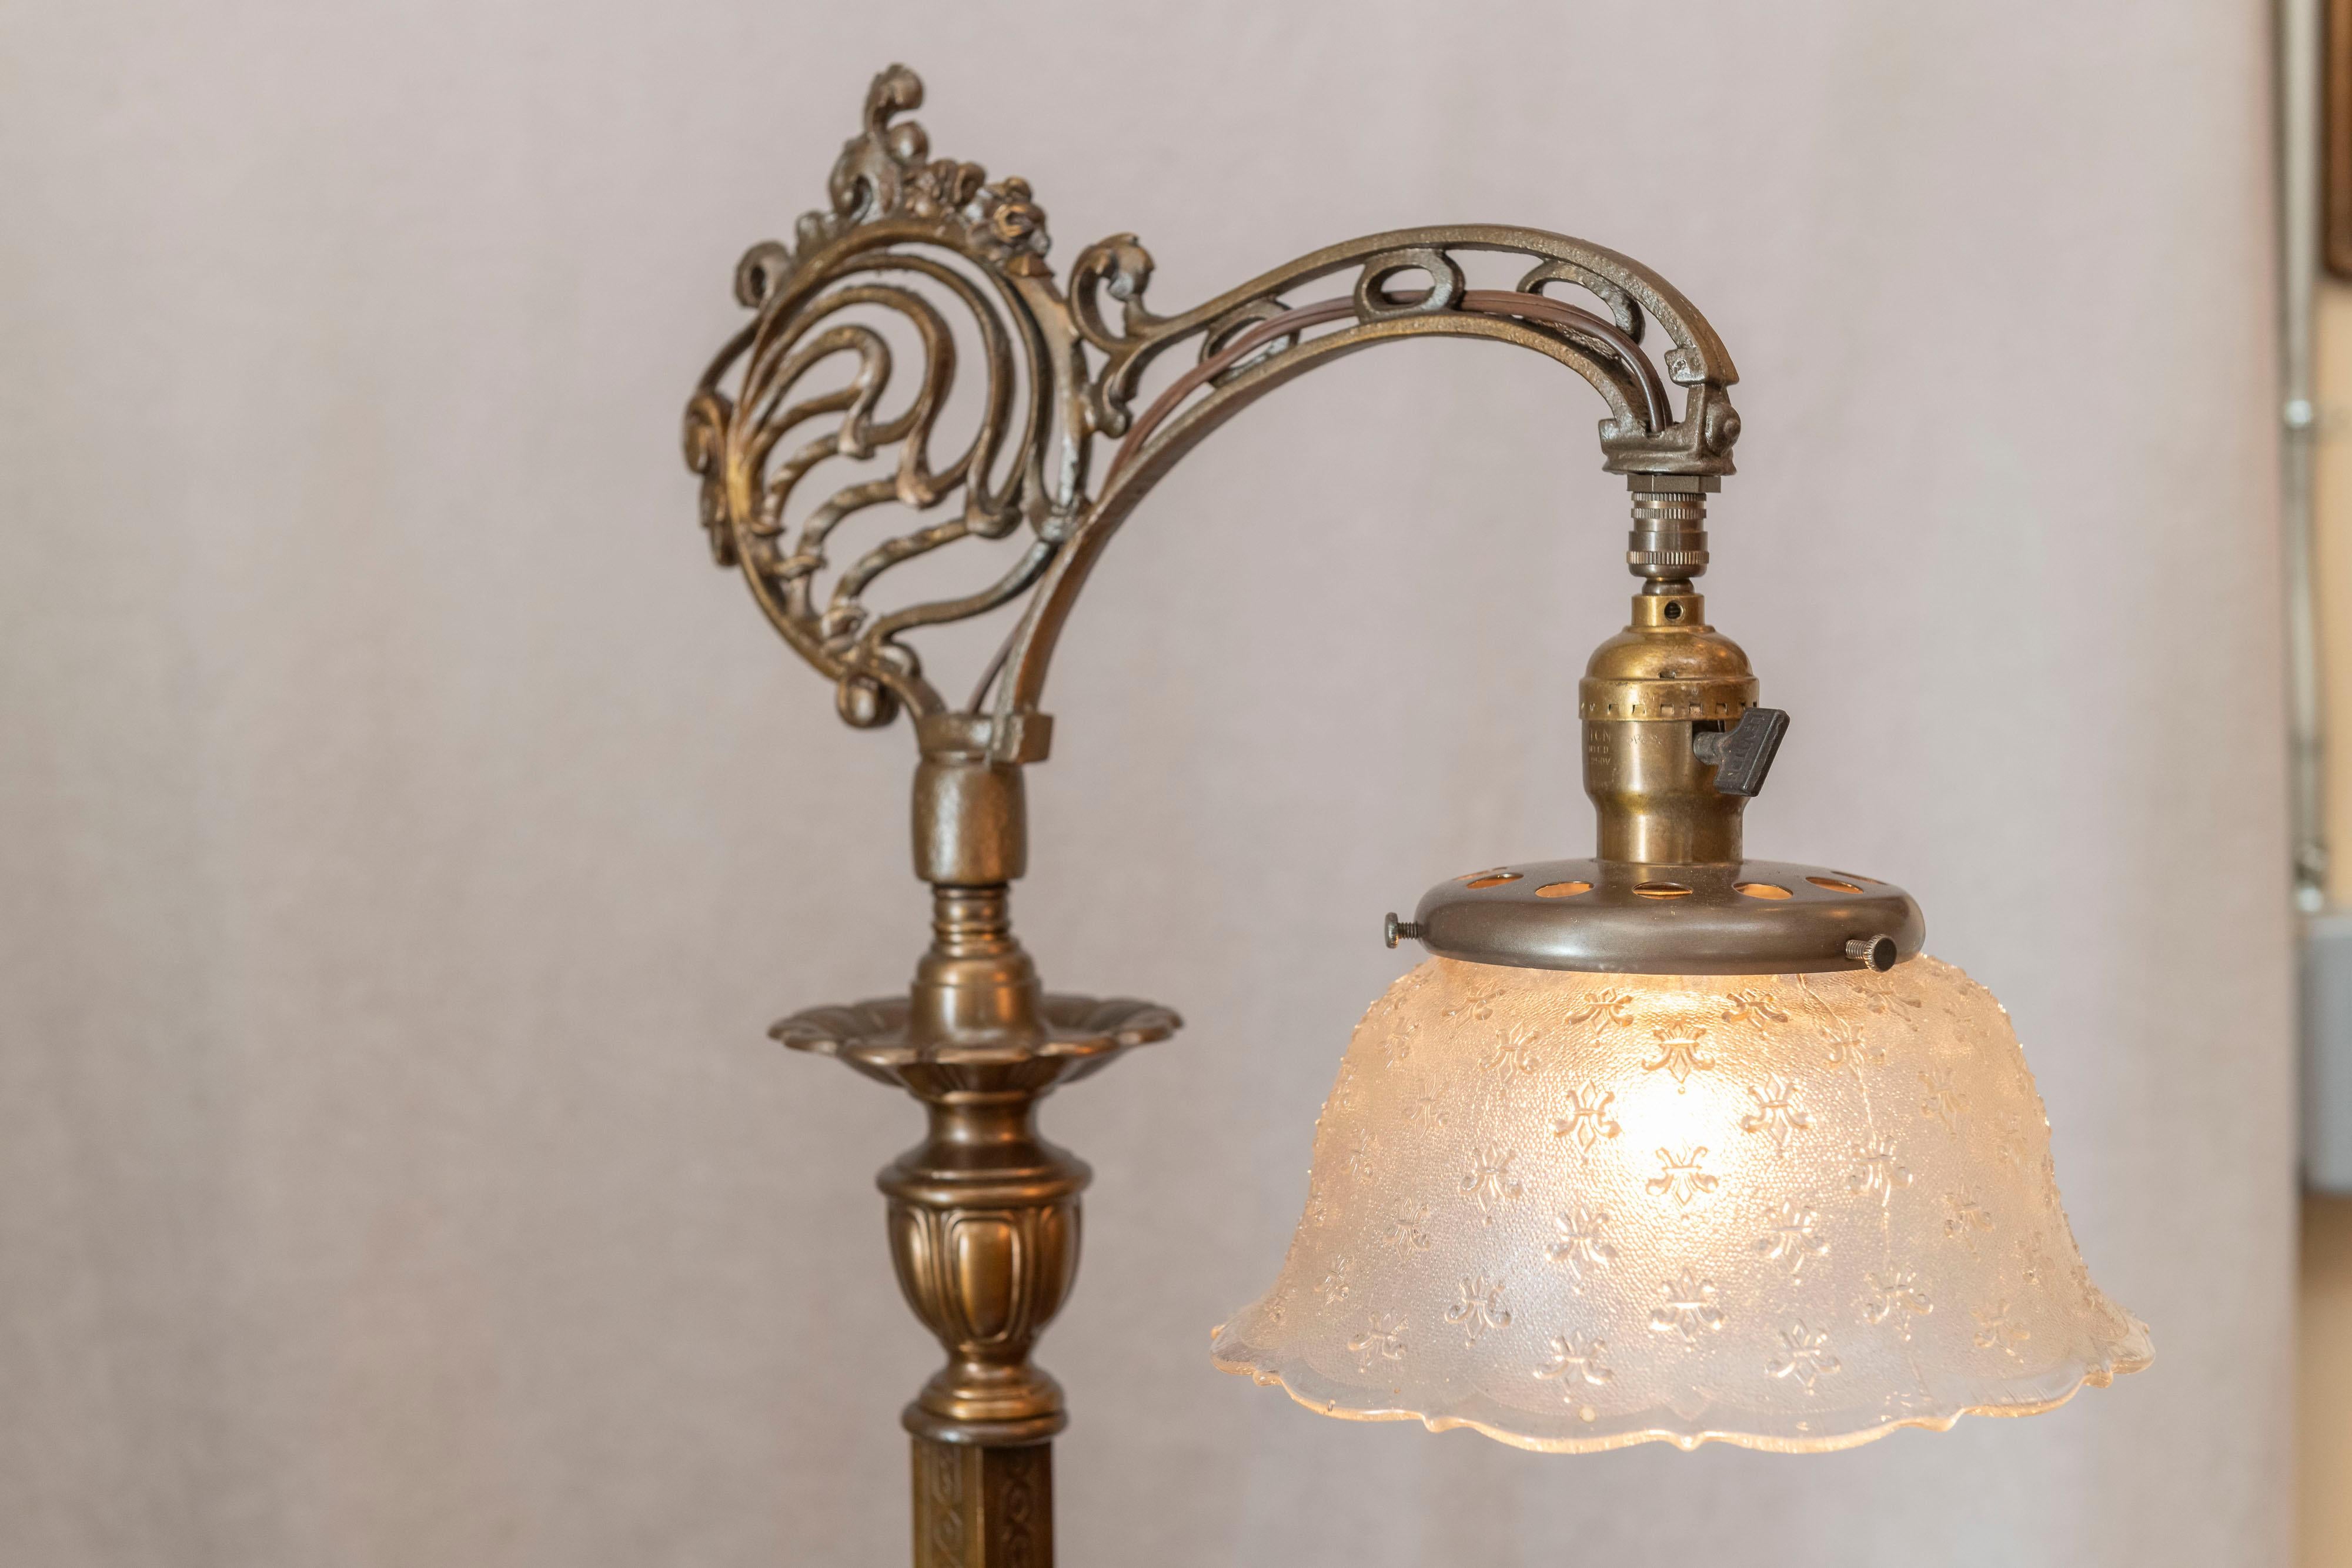 Antique Floor Lamp Bridge Style With, Vintage Floor Lamps With Glass Shade